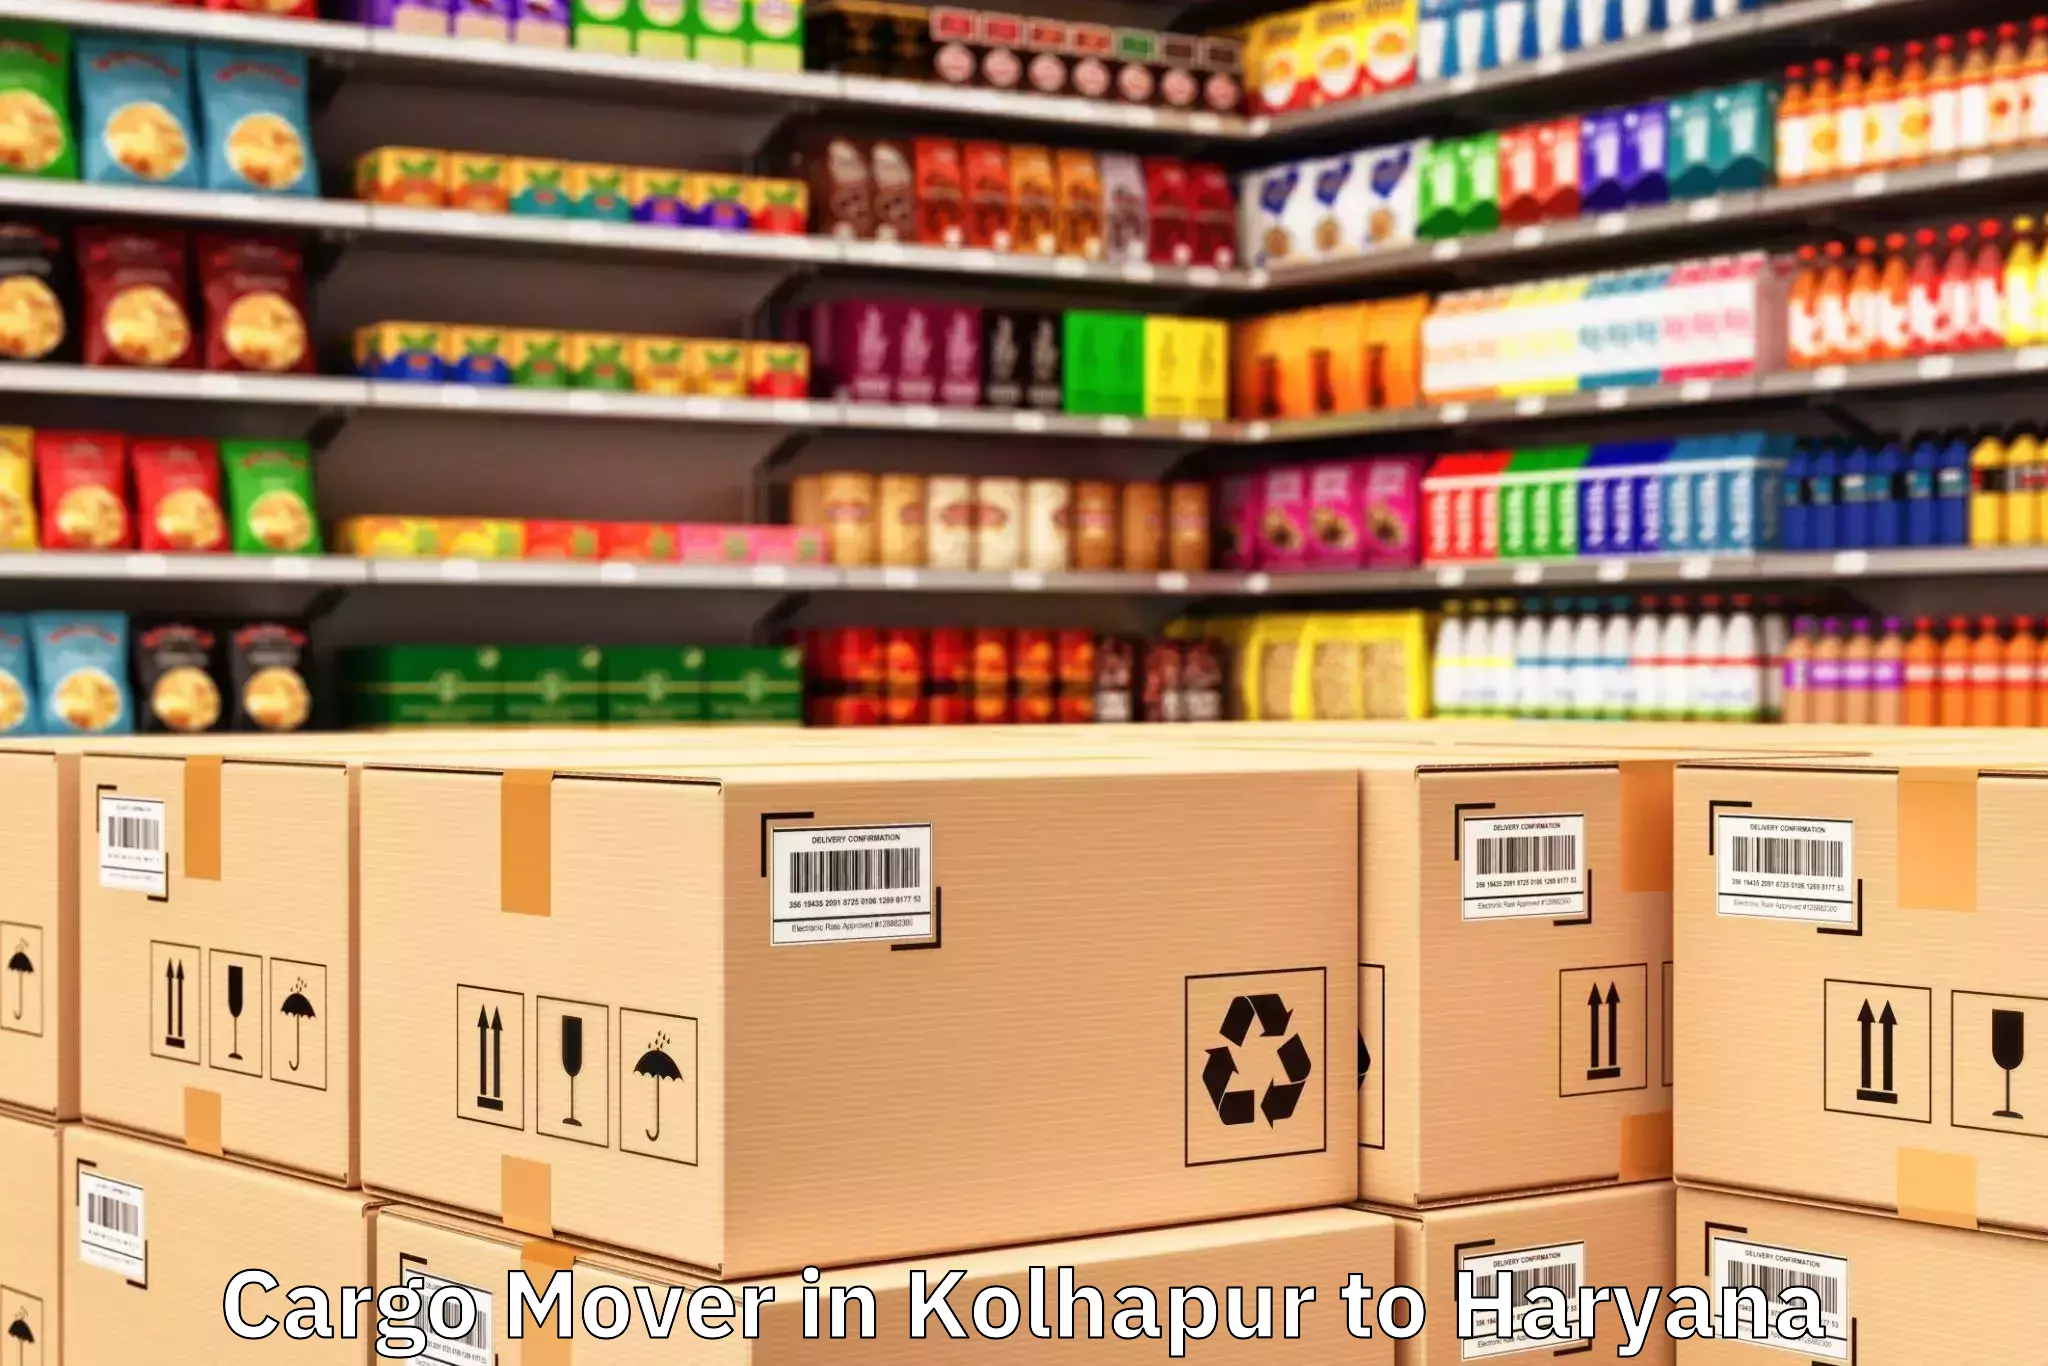 Reliable Kolhapur to Mittals Mega Mall Cargo Mover